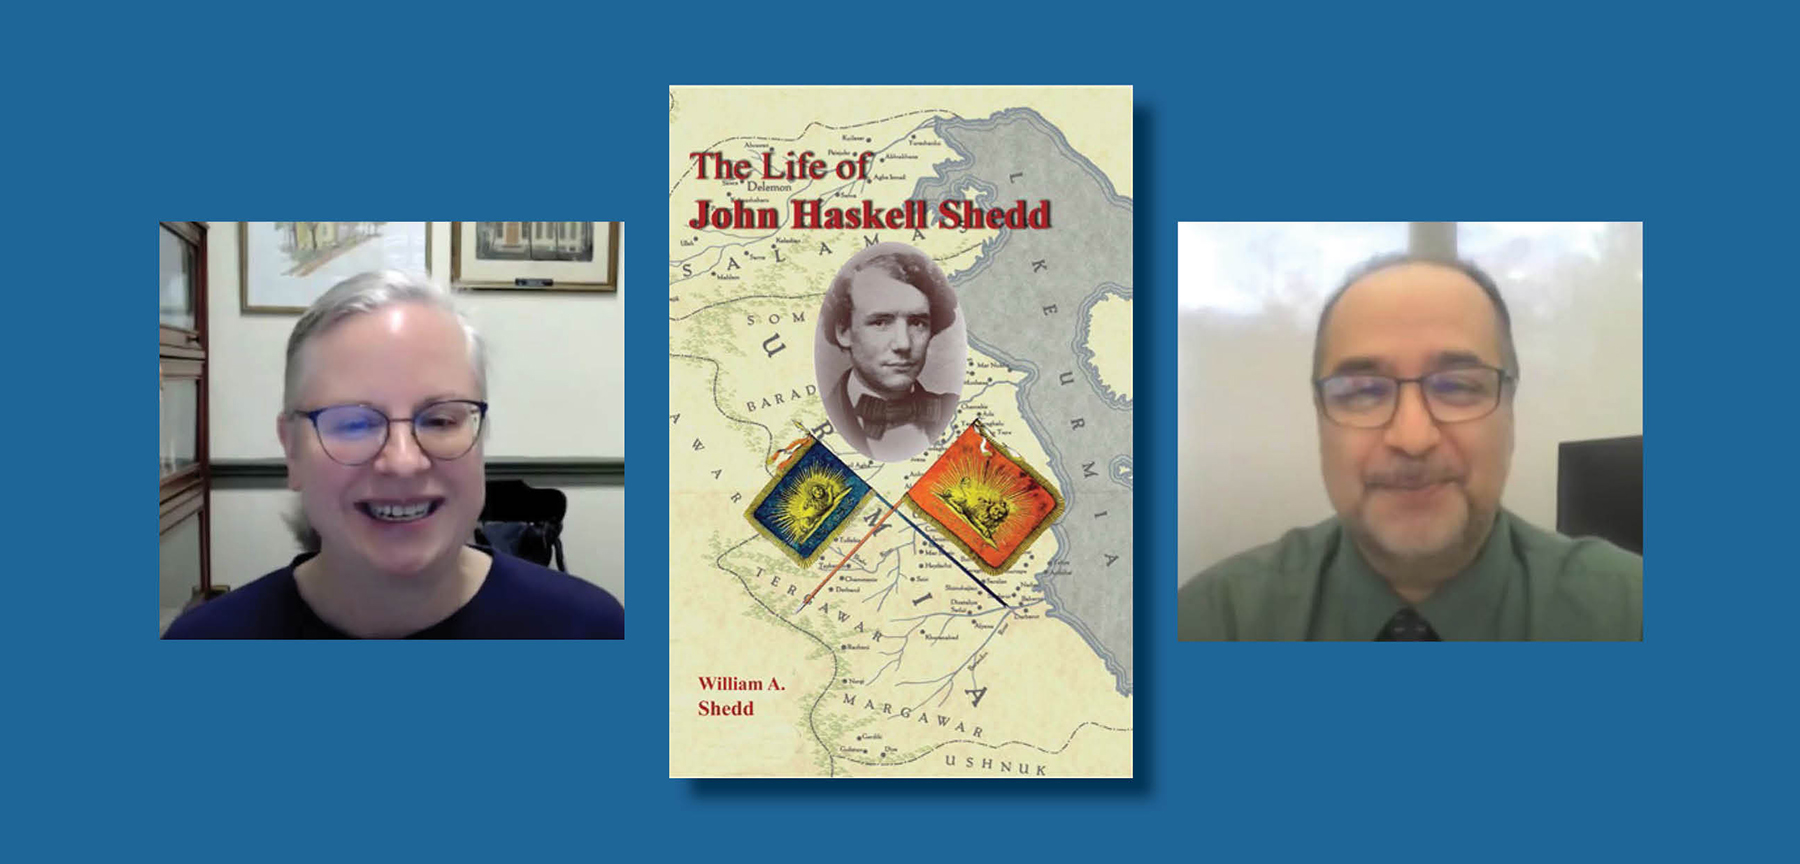 (left to right) Nancy Taylor, “The Life of John Haskell Shedd” book cover, Hooman Estelami. Image courtesy of PHS.